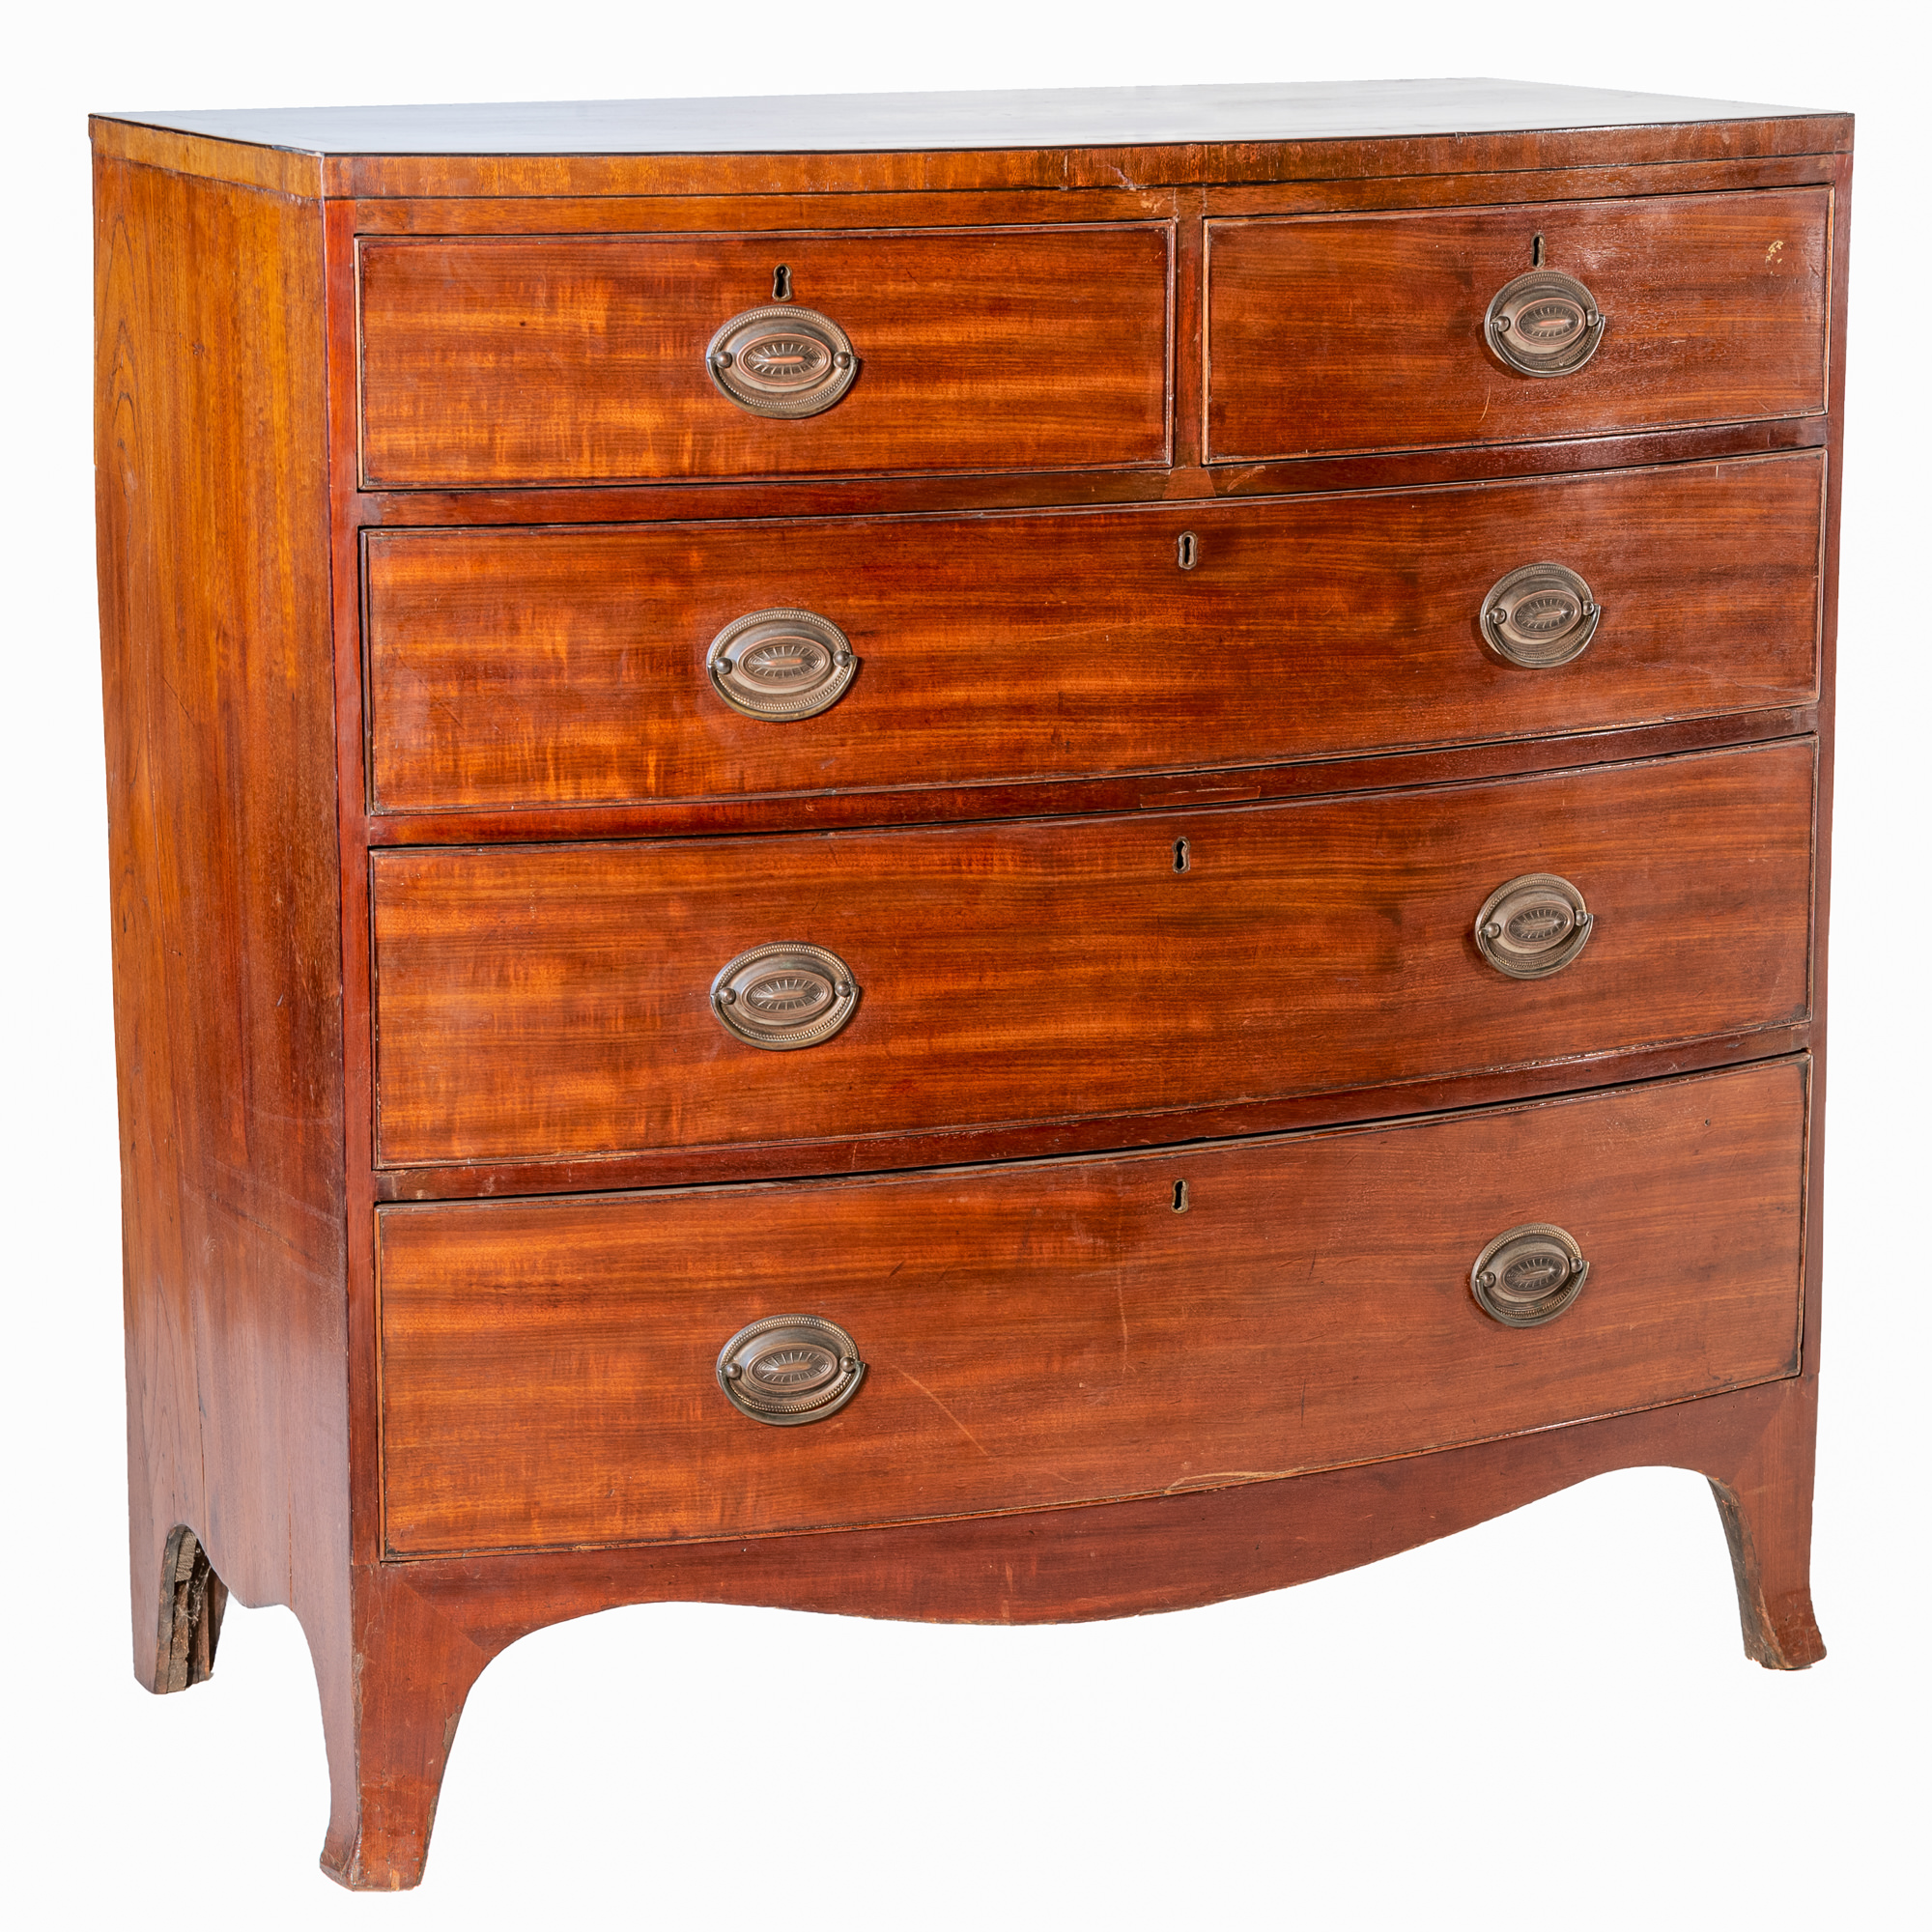 'George III Mahogany Bowfront Chest of Drawers Circa 1800'